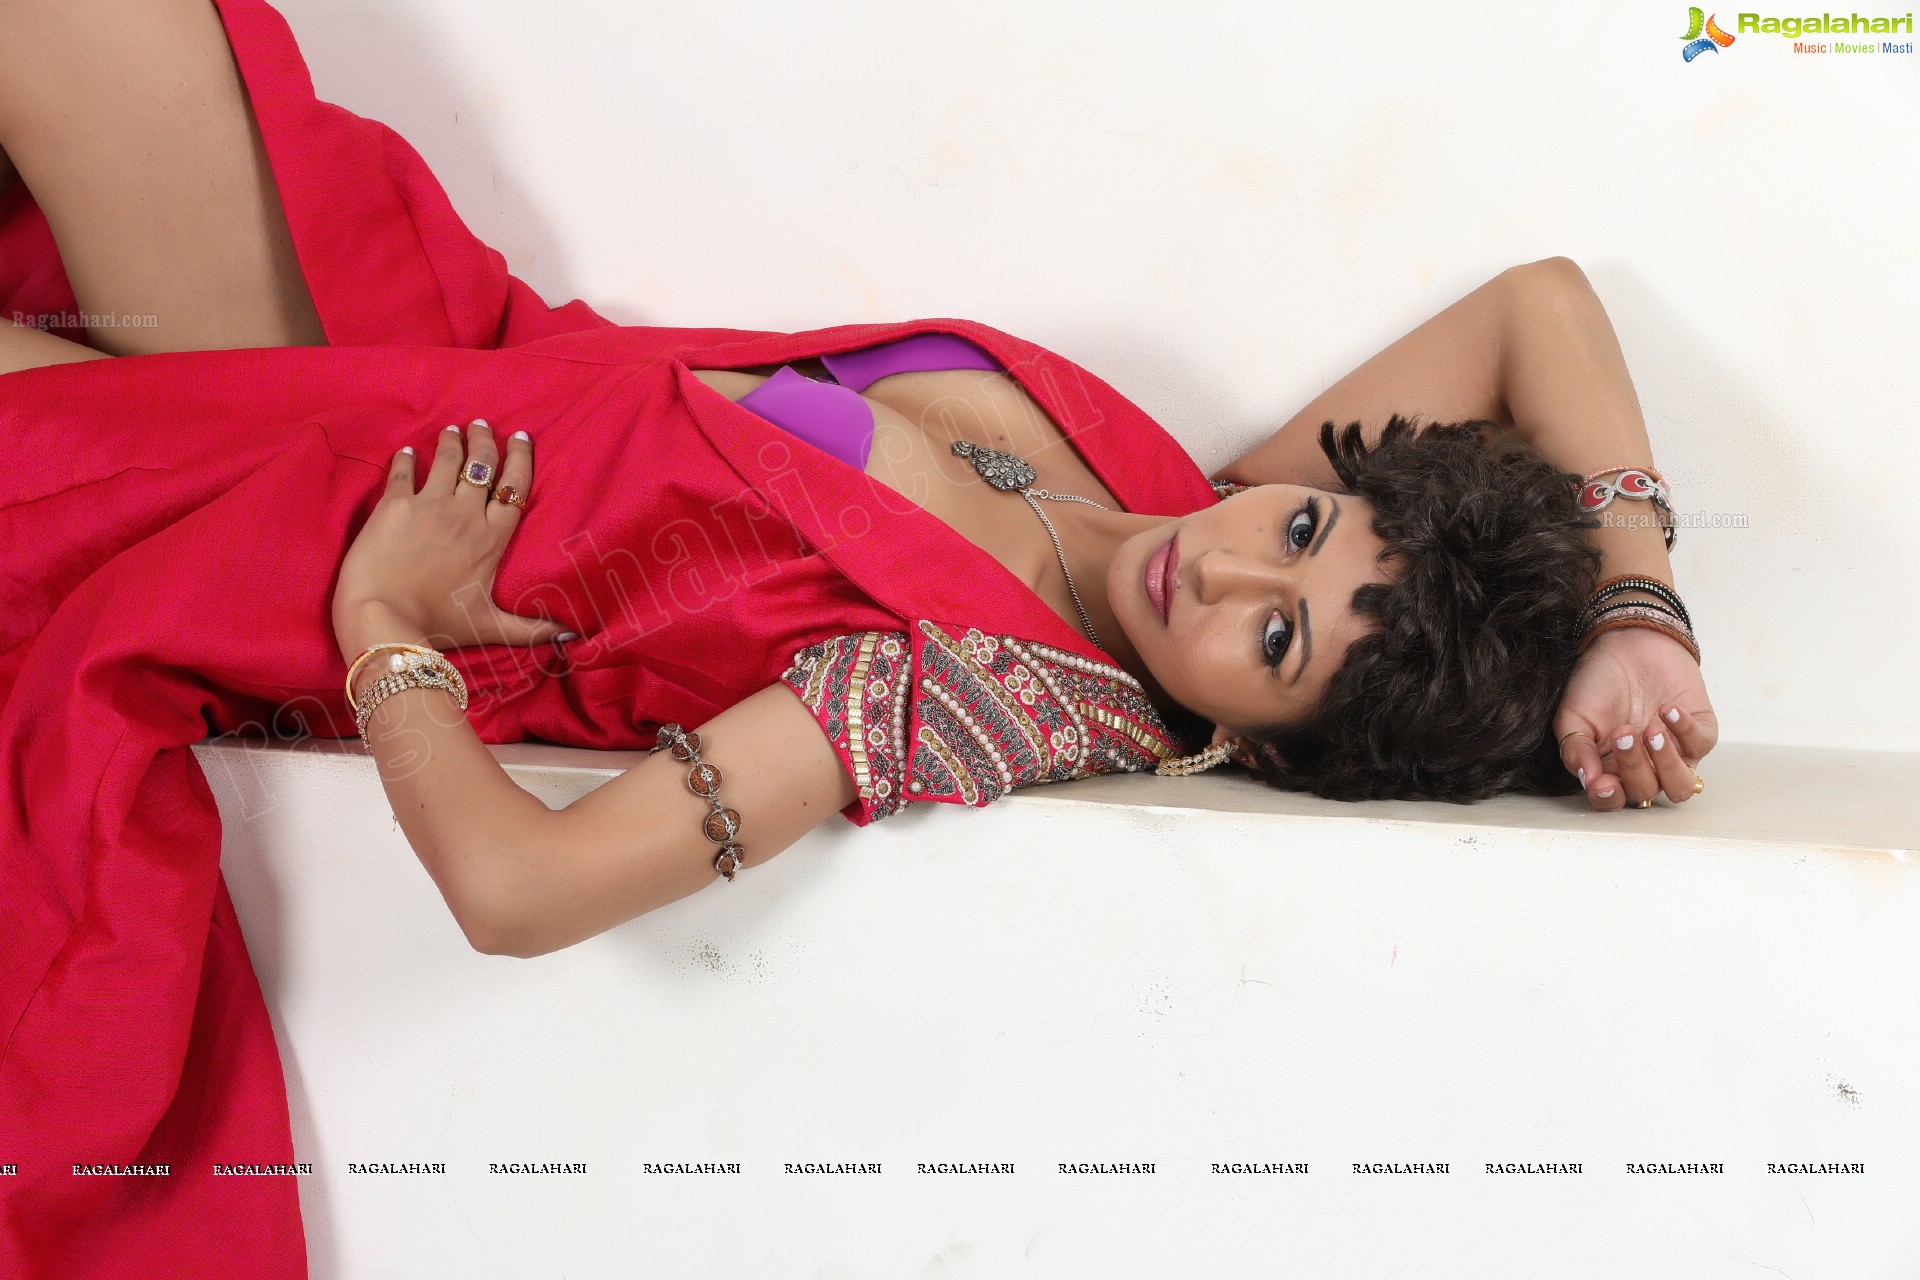 Rhithya Perera (Exclusive) (High Definition)